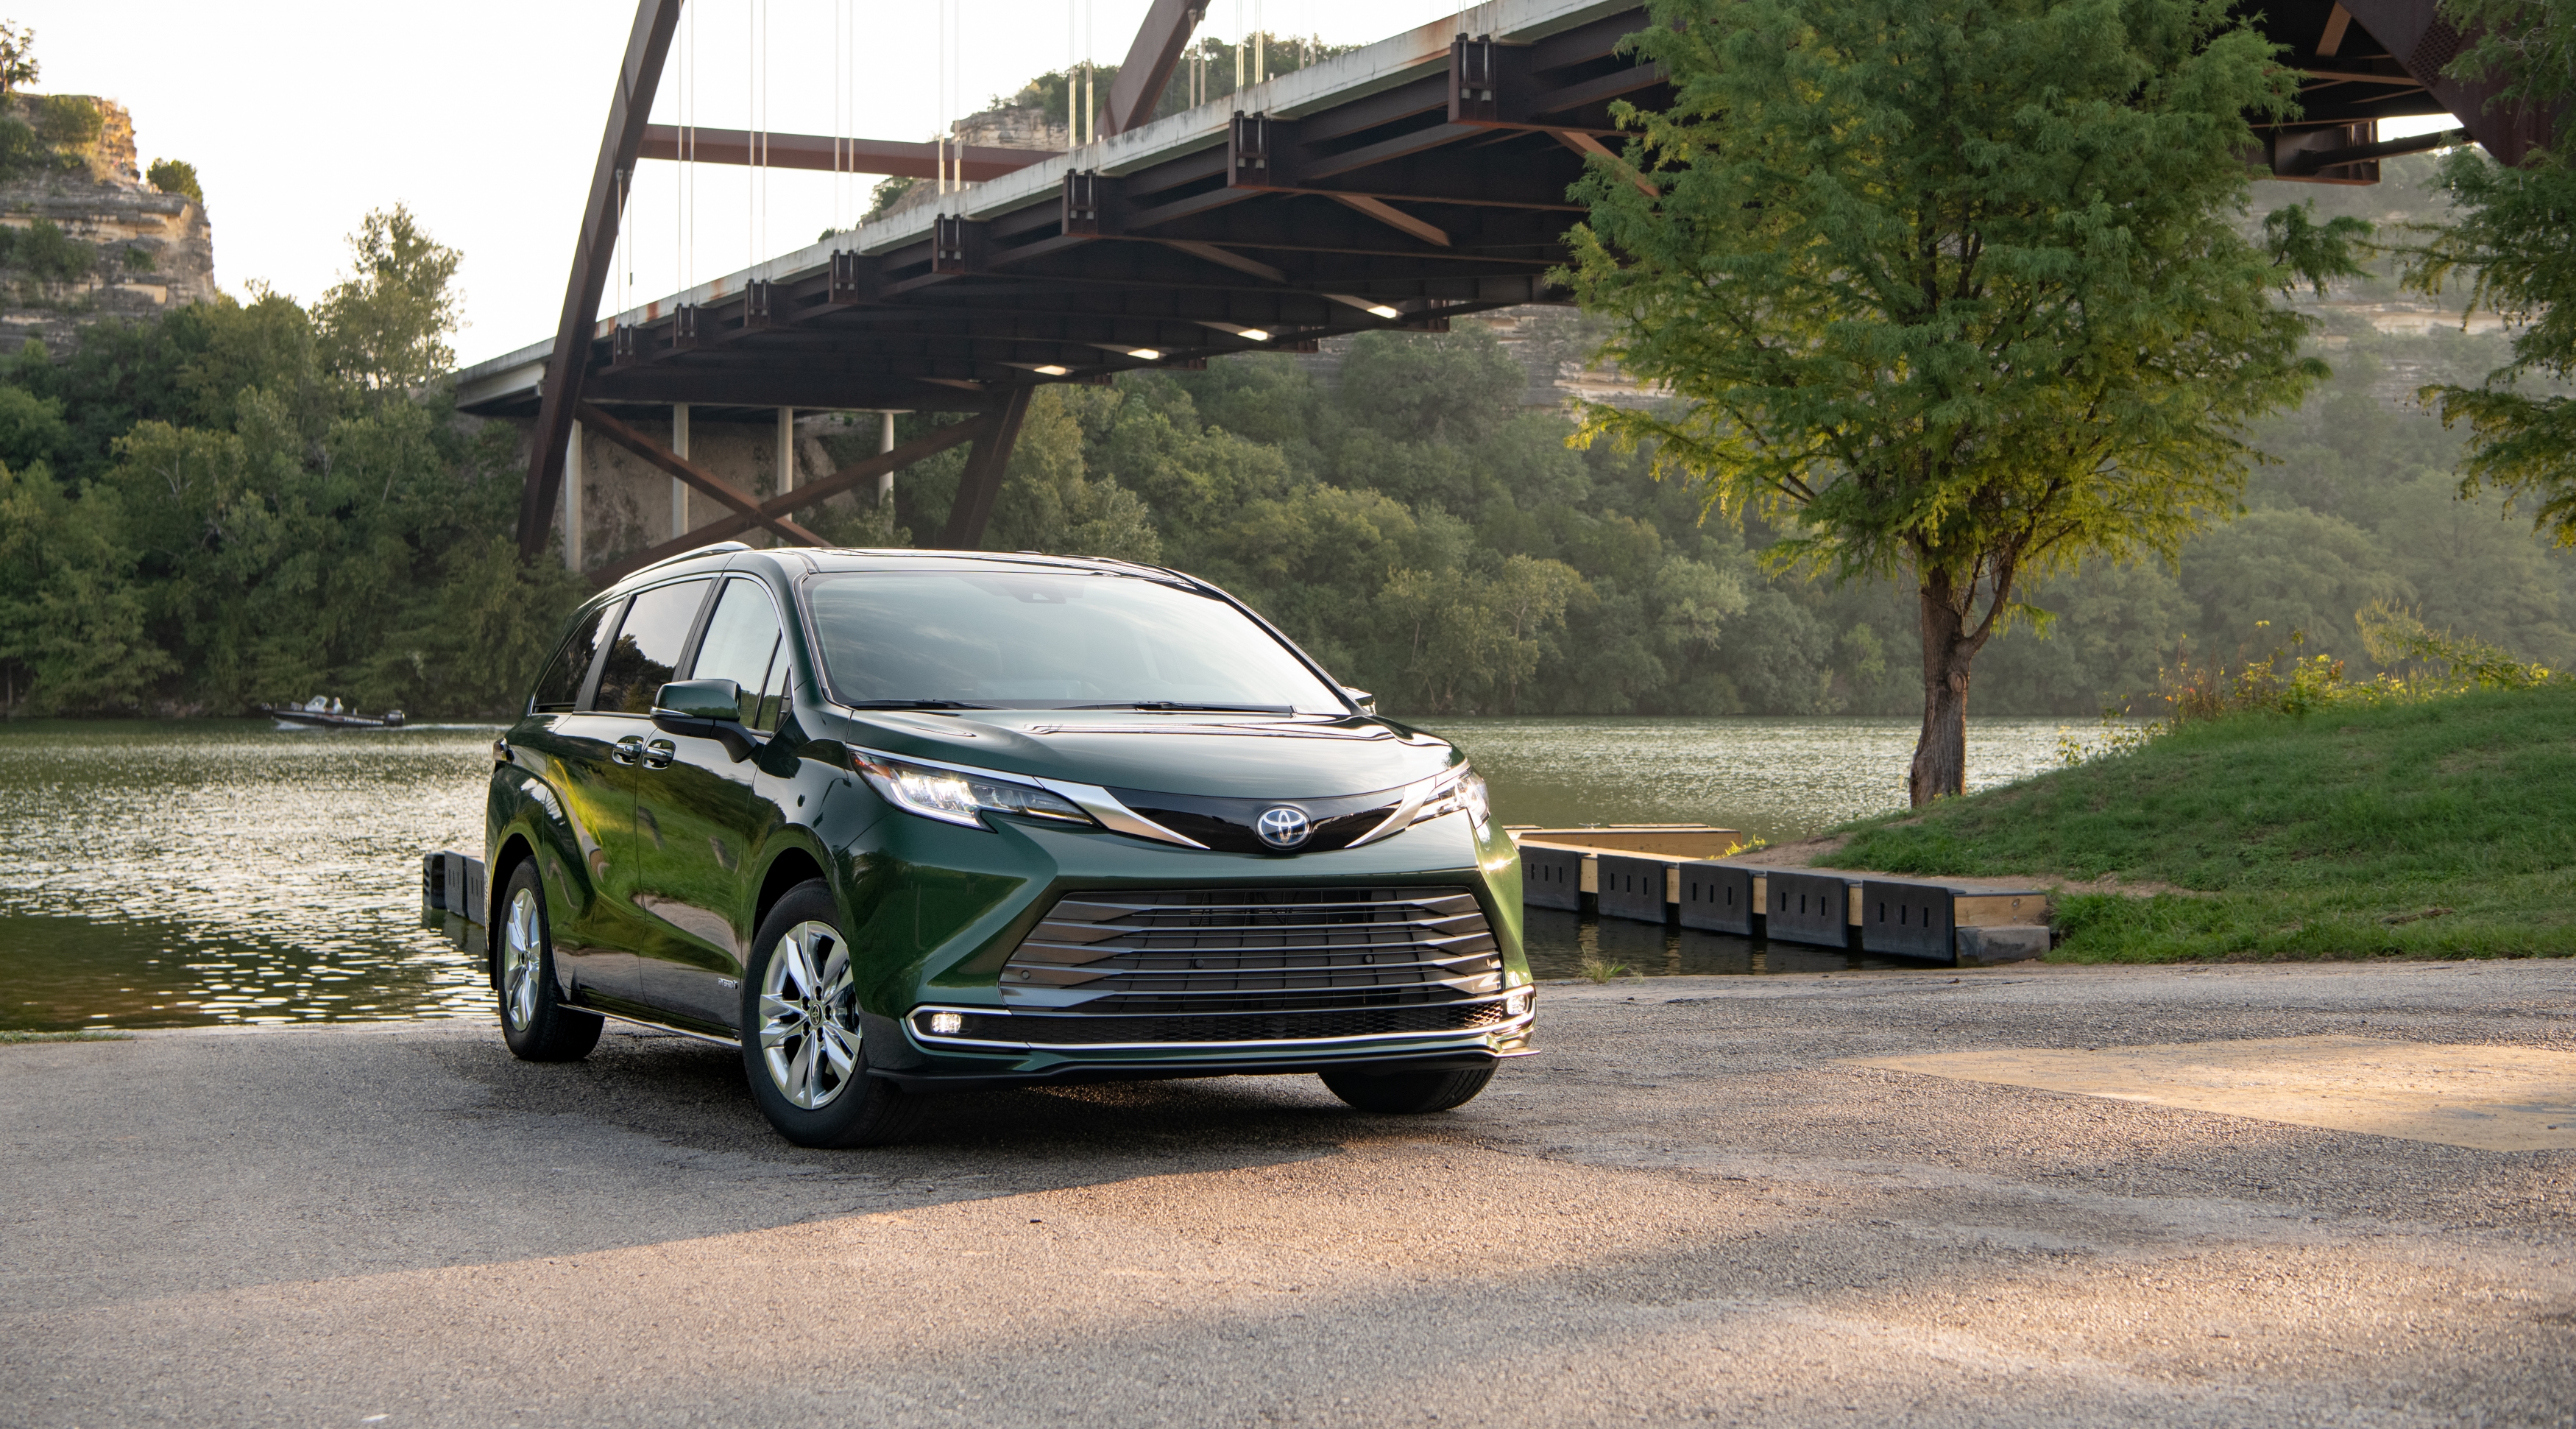 2021 Toyota Sienna Wins Family Green Car of the Year Award